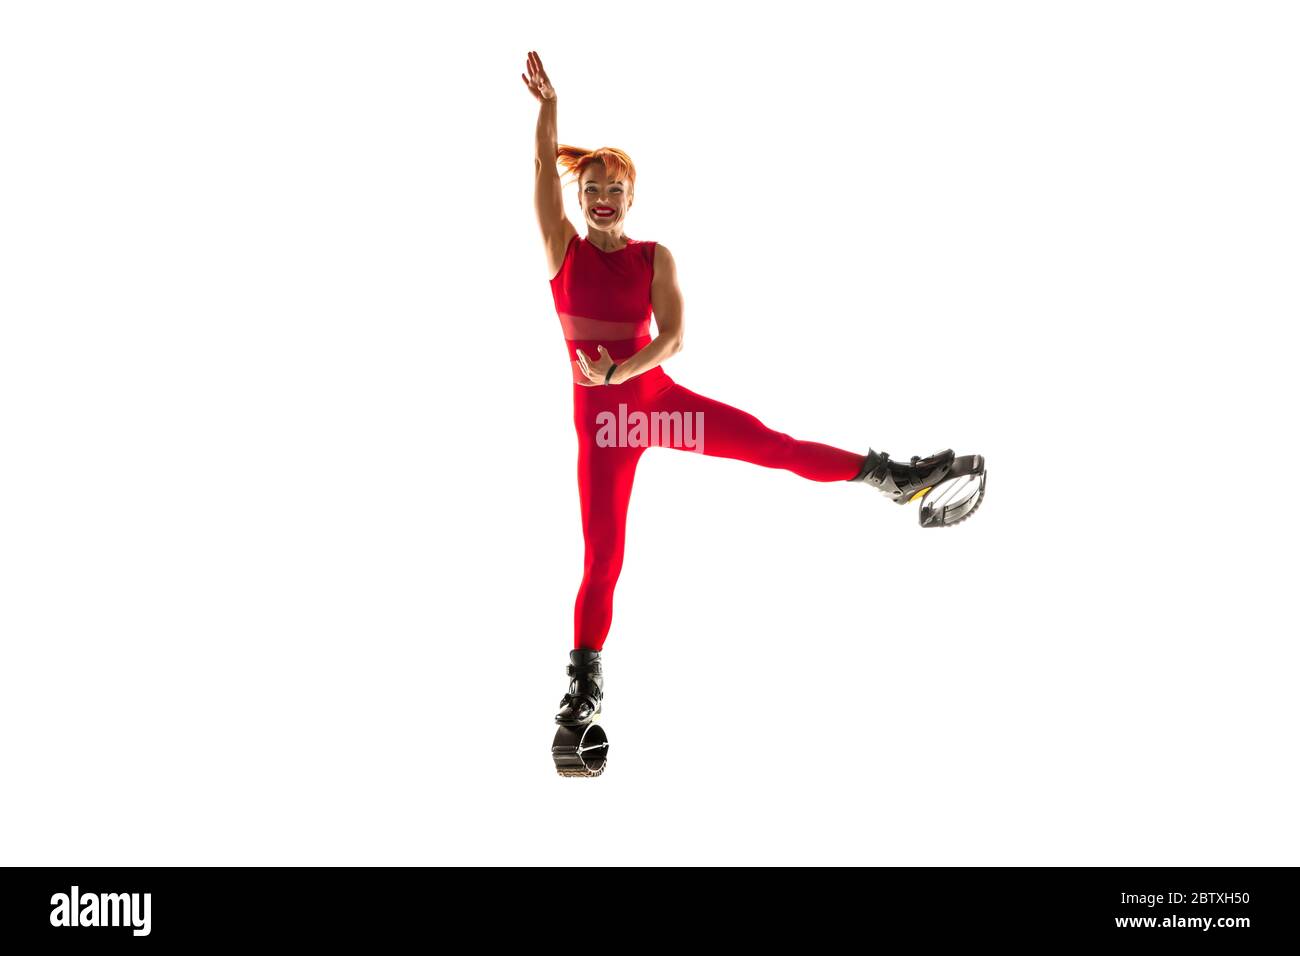 24 Kangoo Jump Photos & High Res Pictures - Getty Images